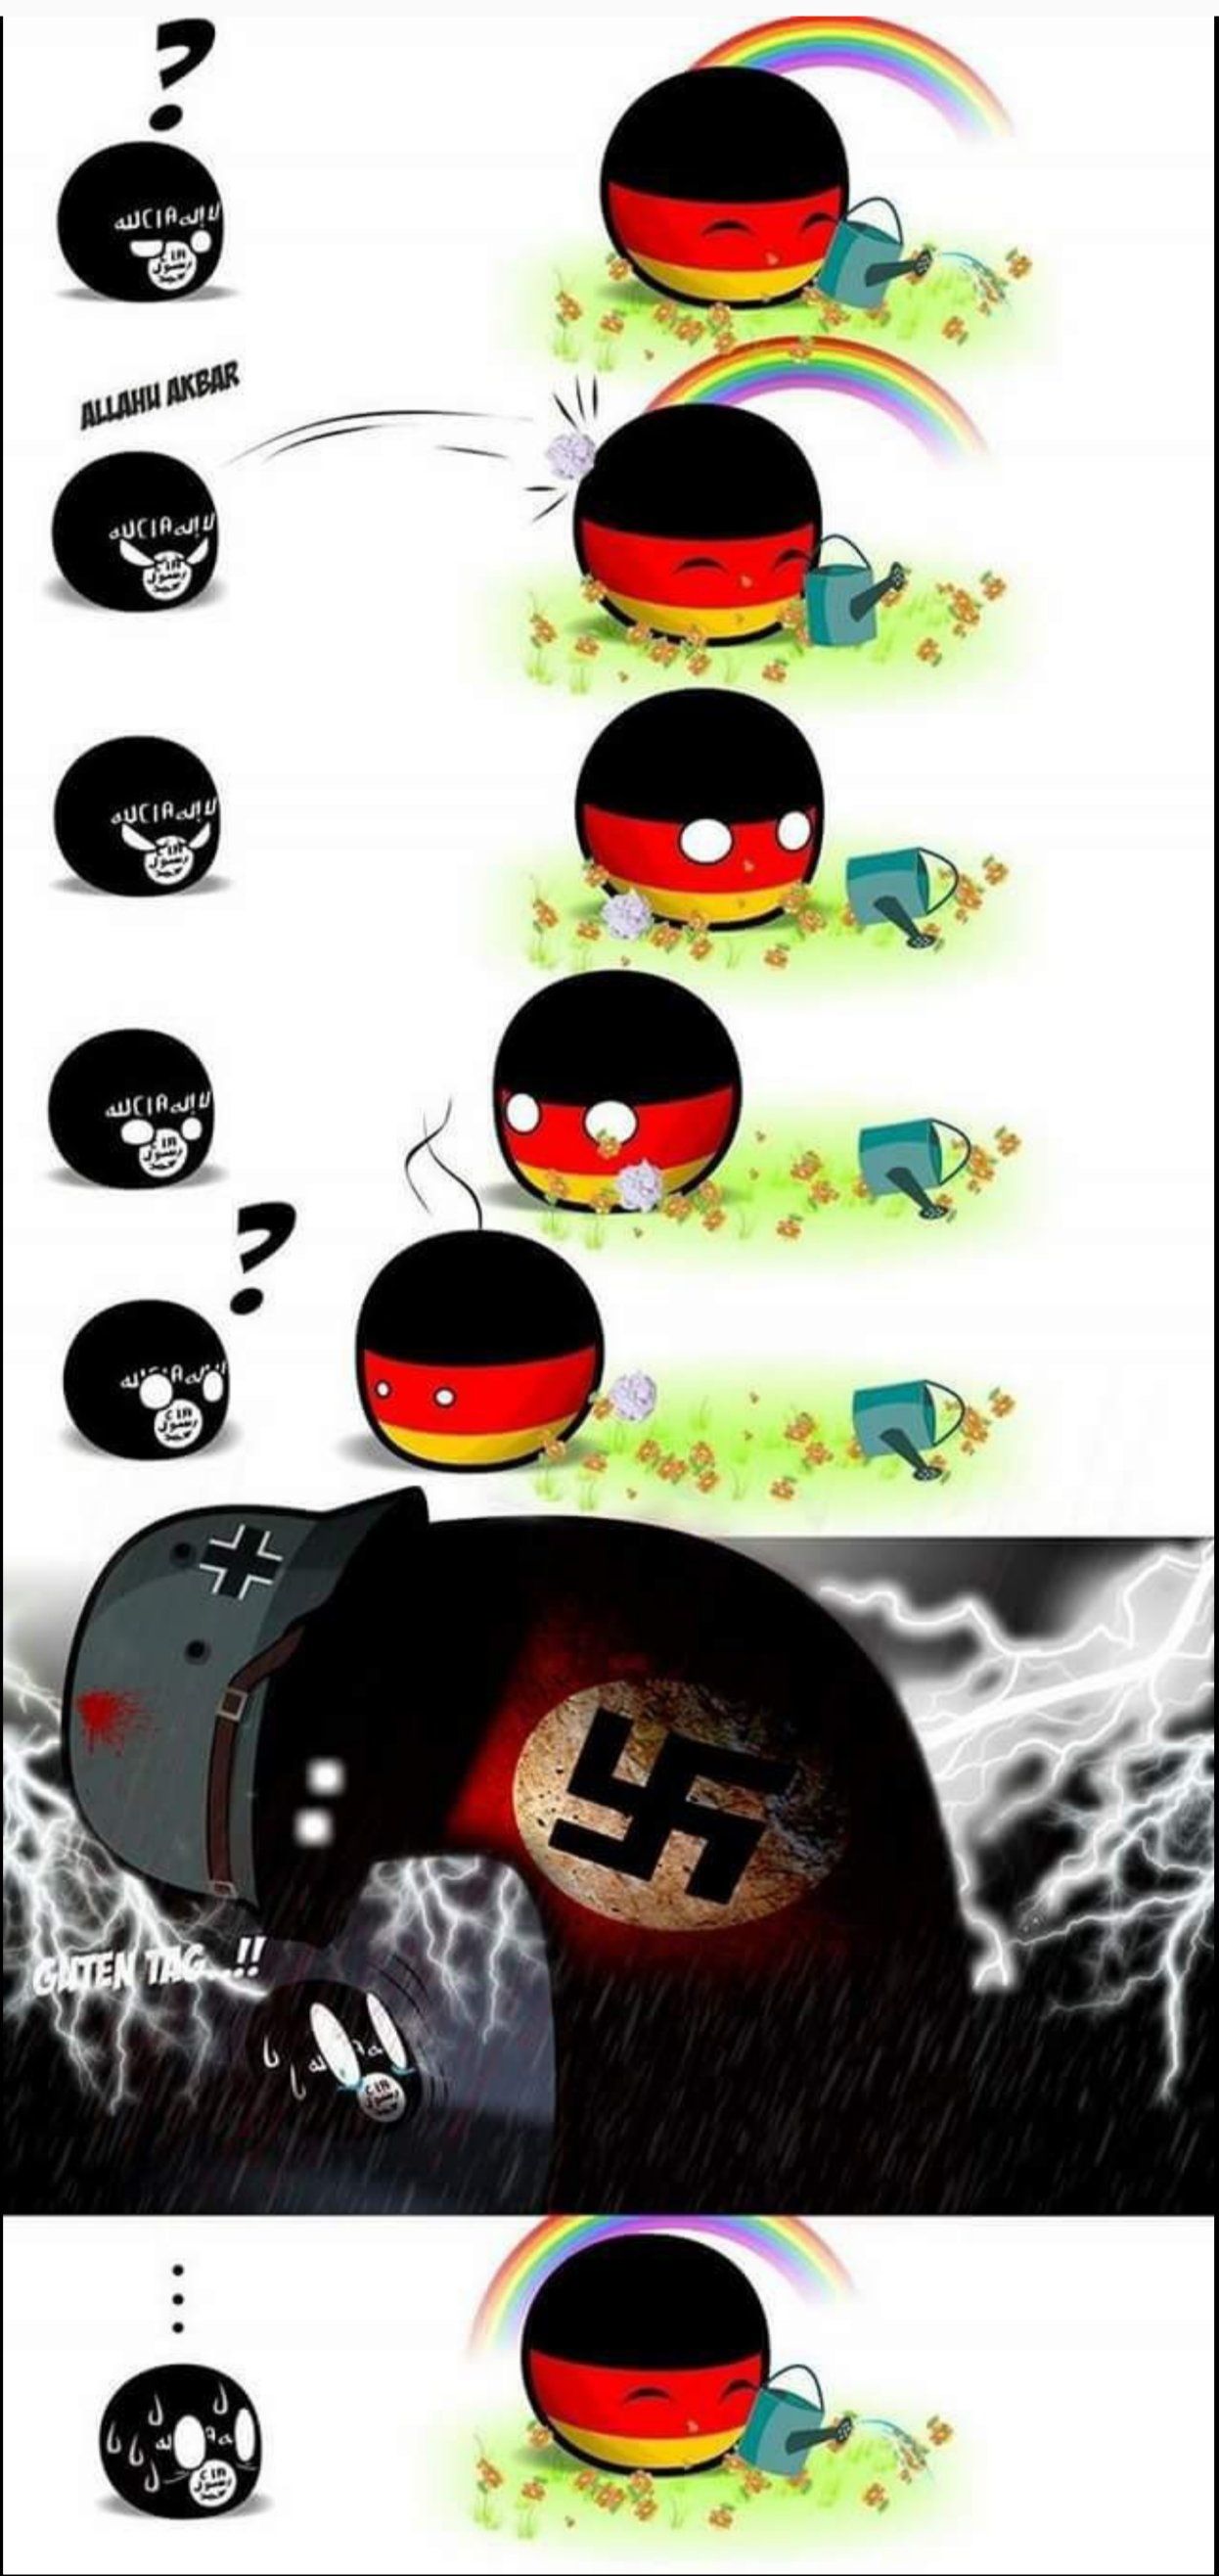 Aint no one messes with Germany, aint no one.